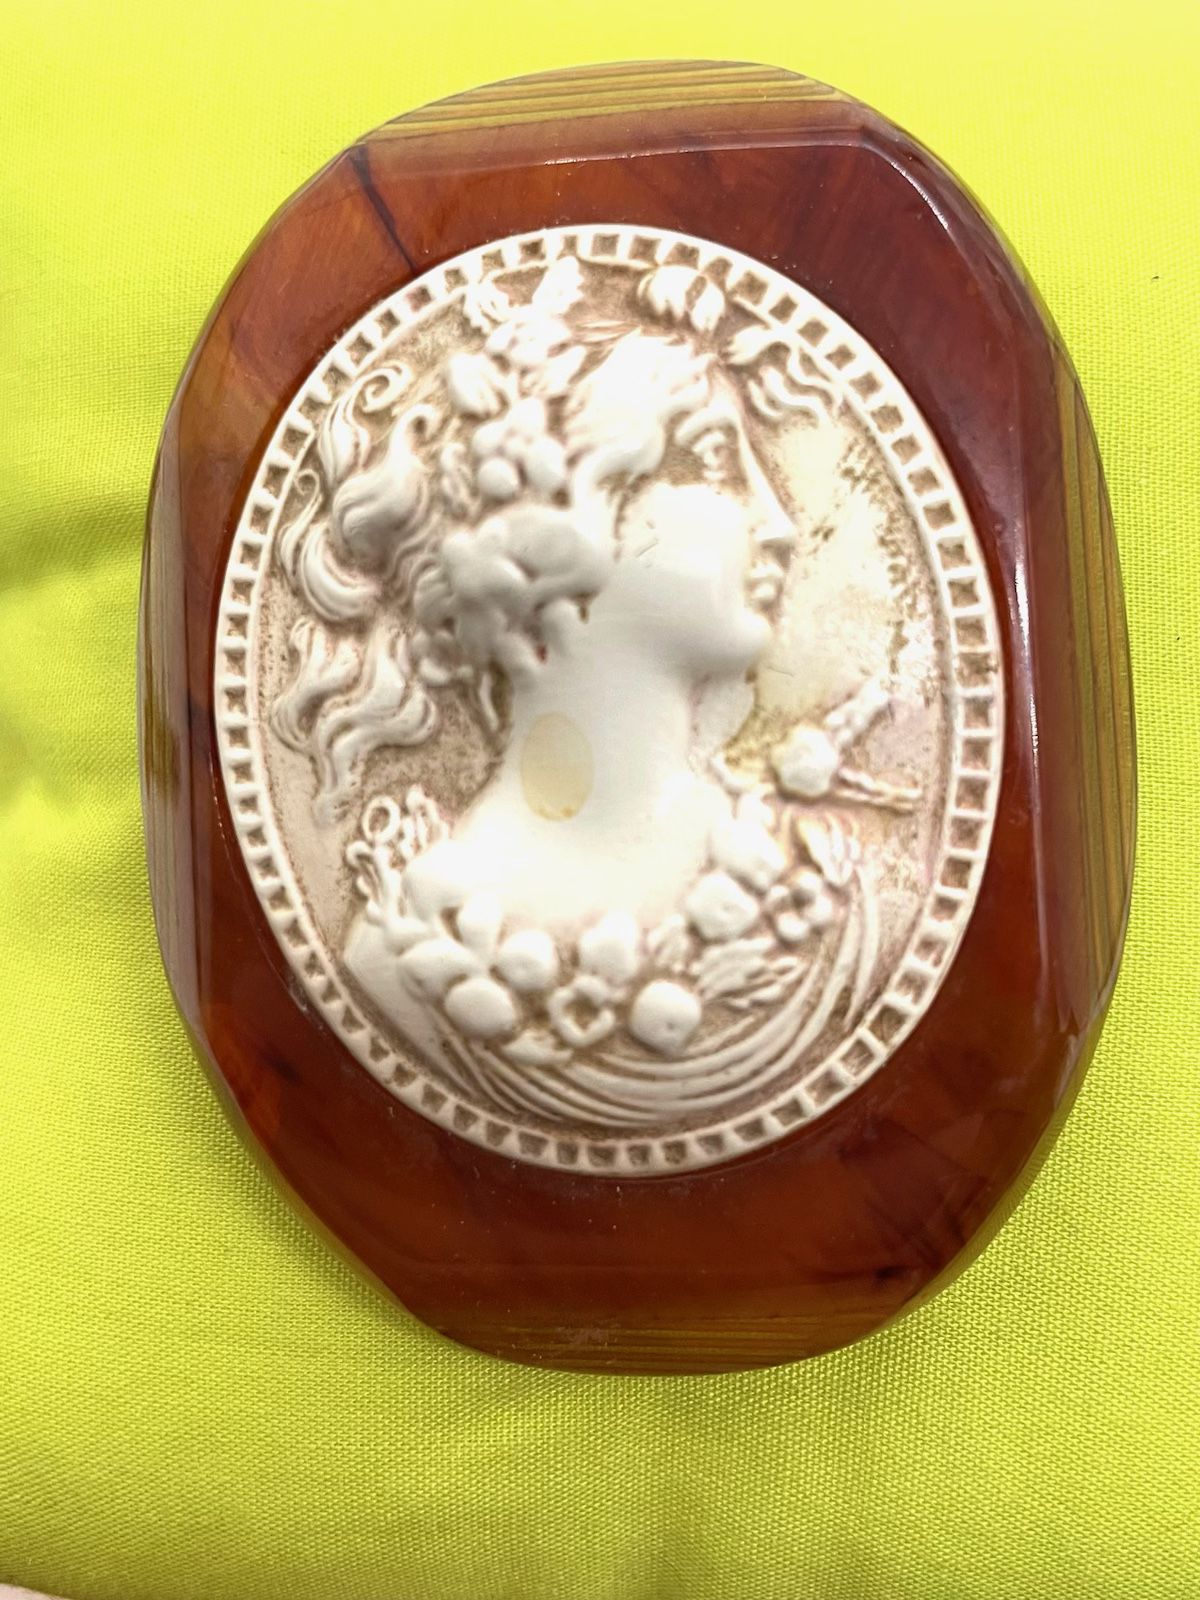 Old Retro Bakelite And Celluloid Cameo Brooch